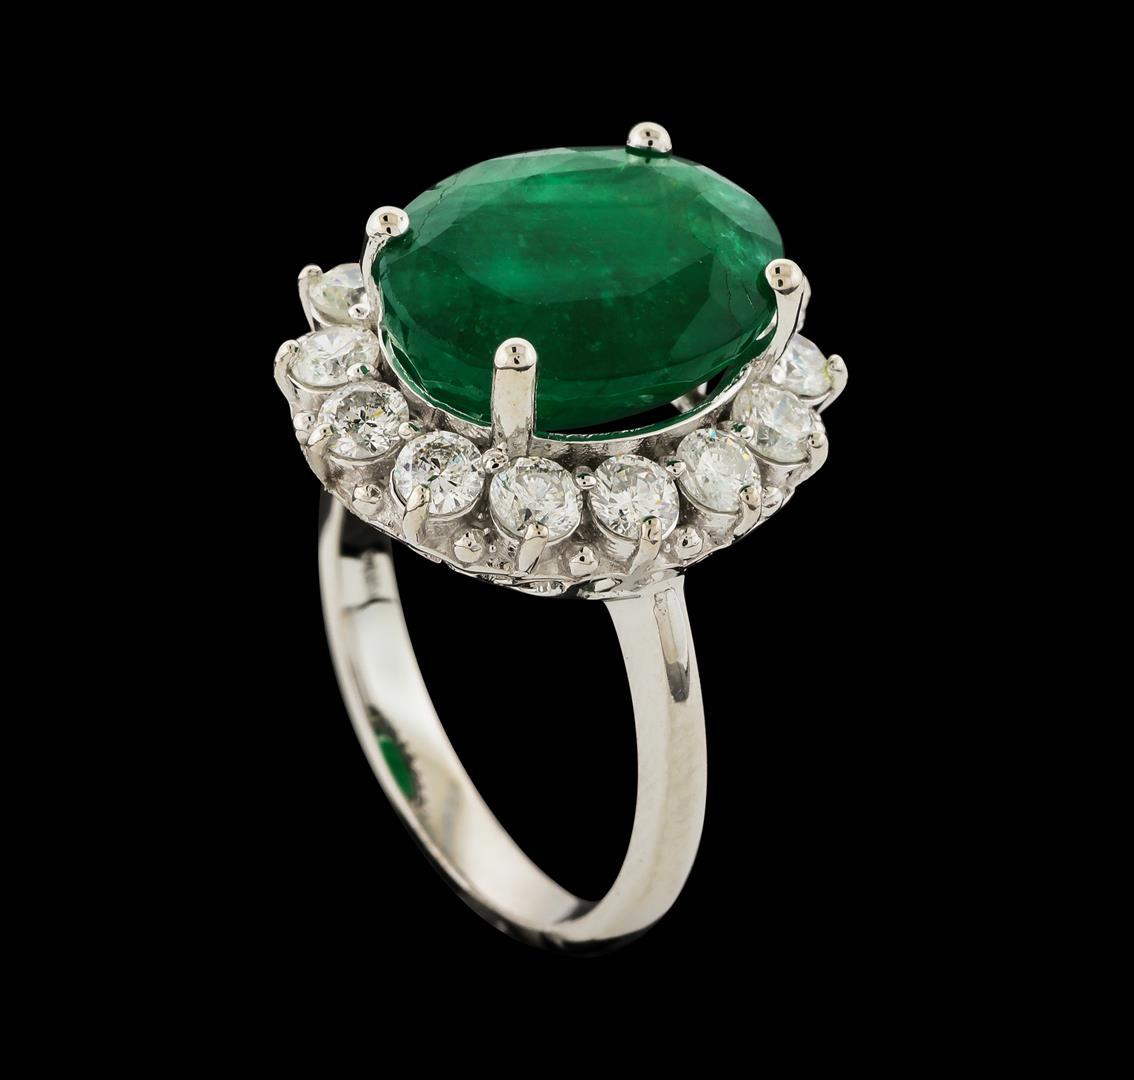 7.16 ctw Emerald and Diamond Ring - 14KT White Gold